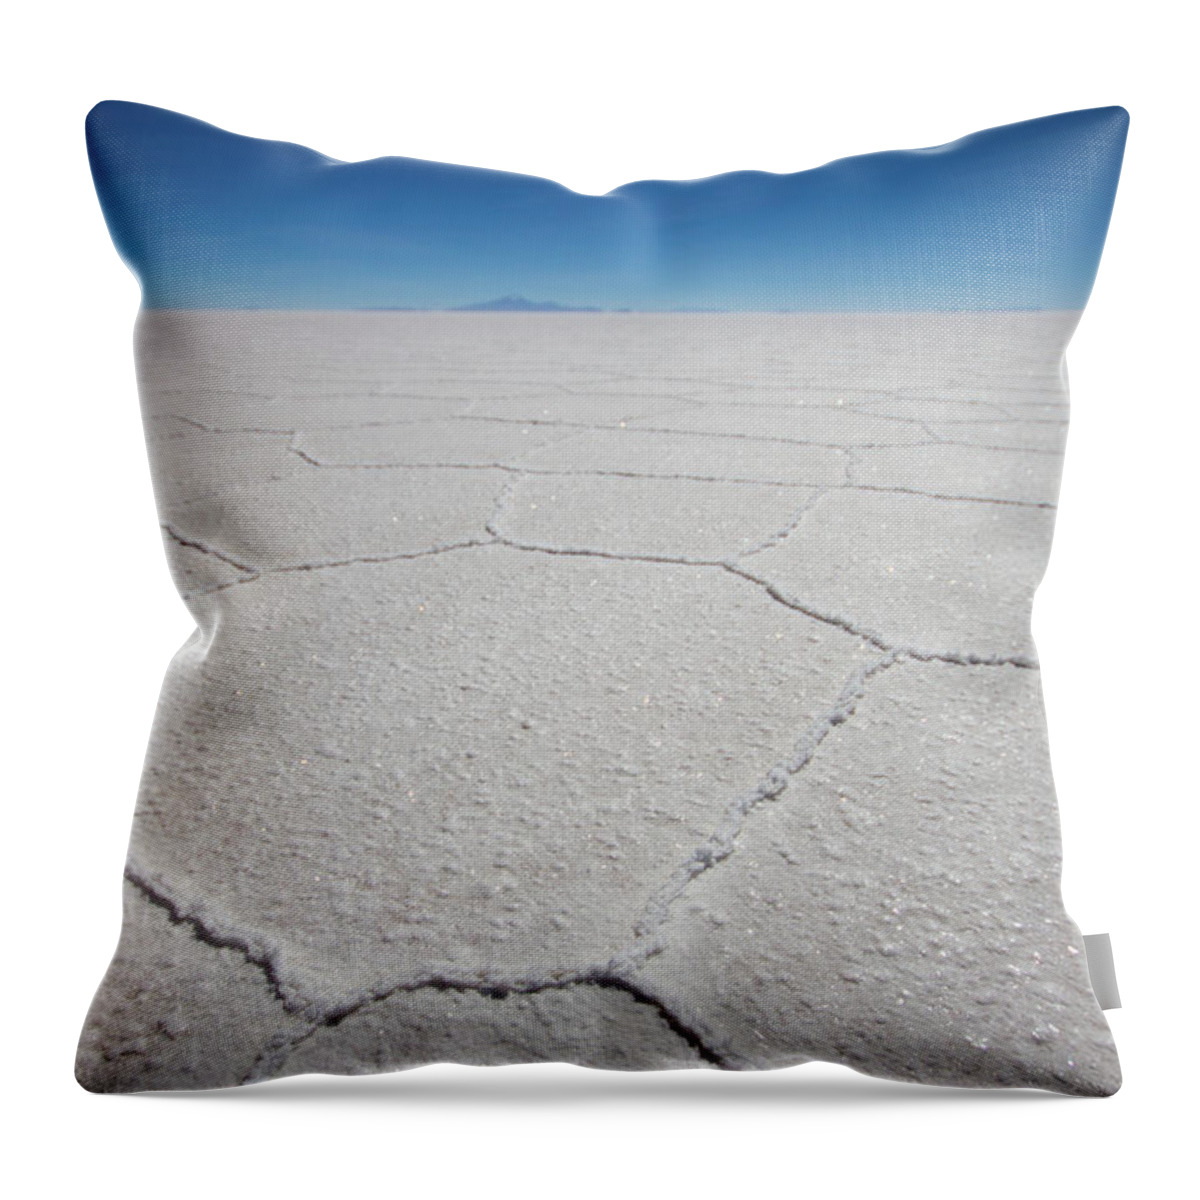 Tranquility Throw Pillow featuring the photograph Geometric Shapes In Salt Flat by Universal Stopping Point Photography